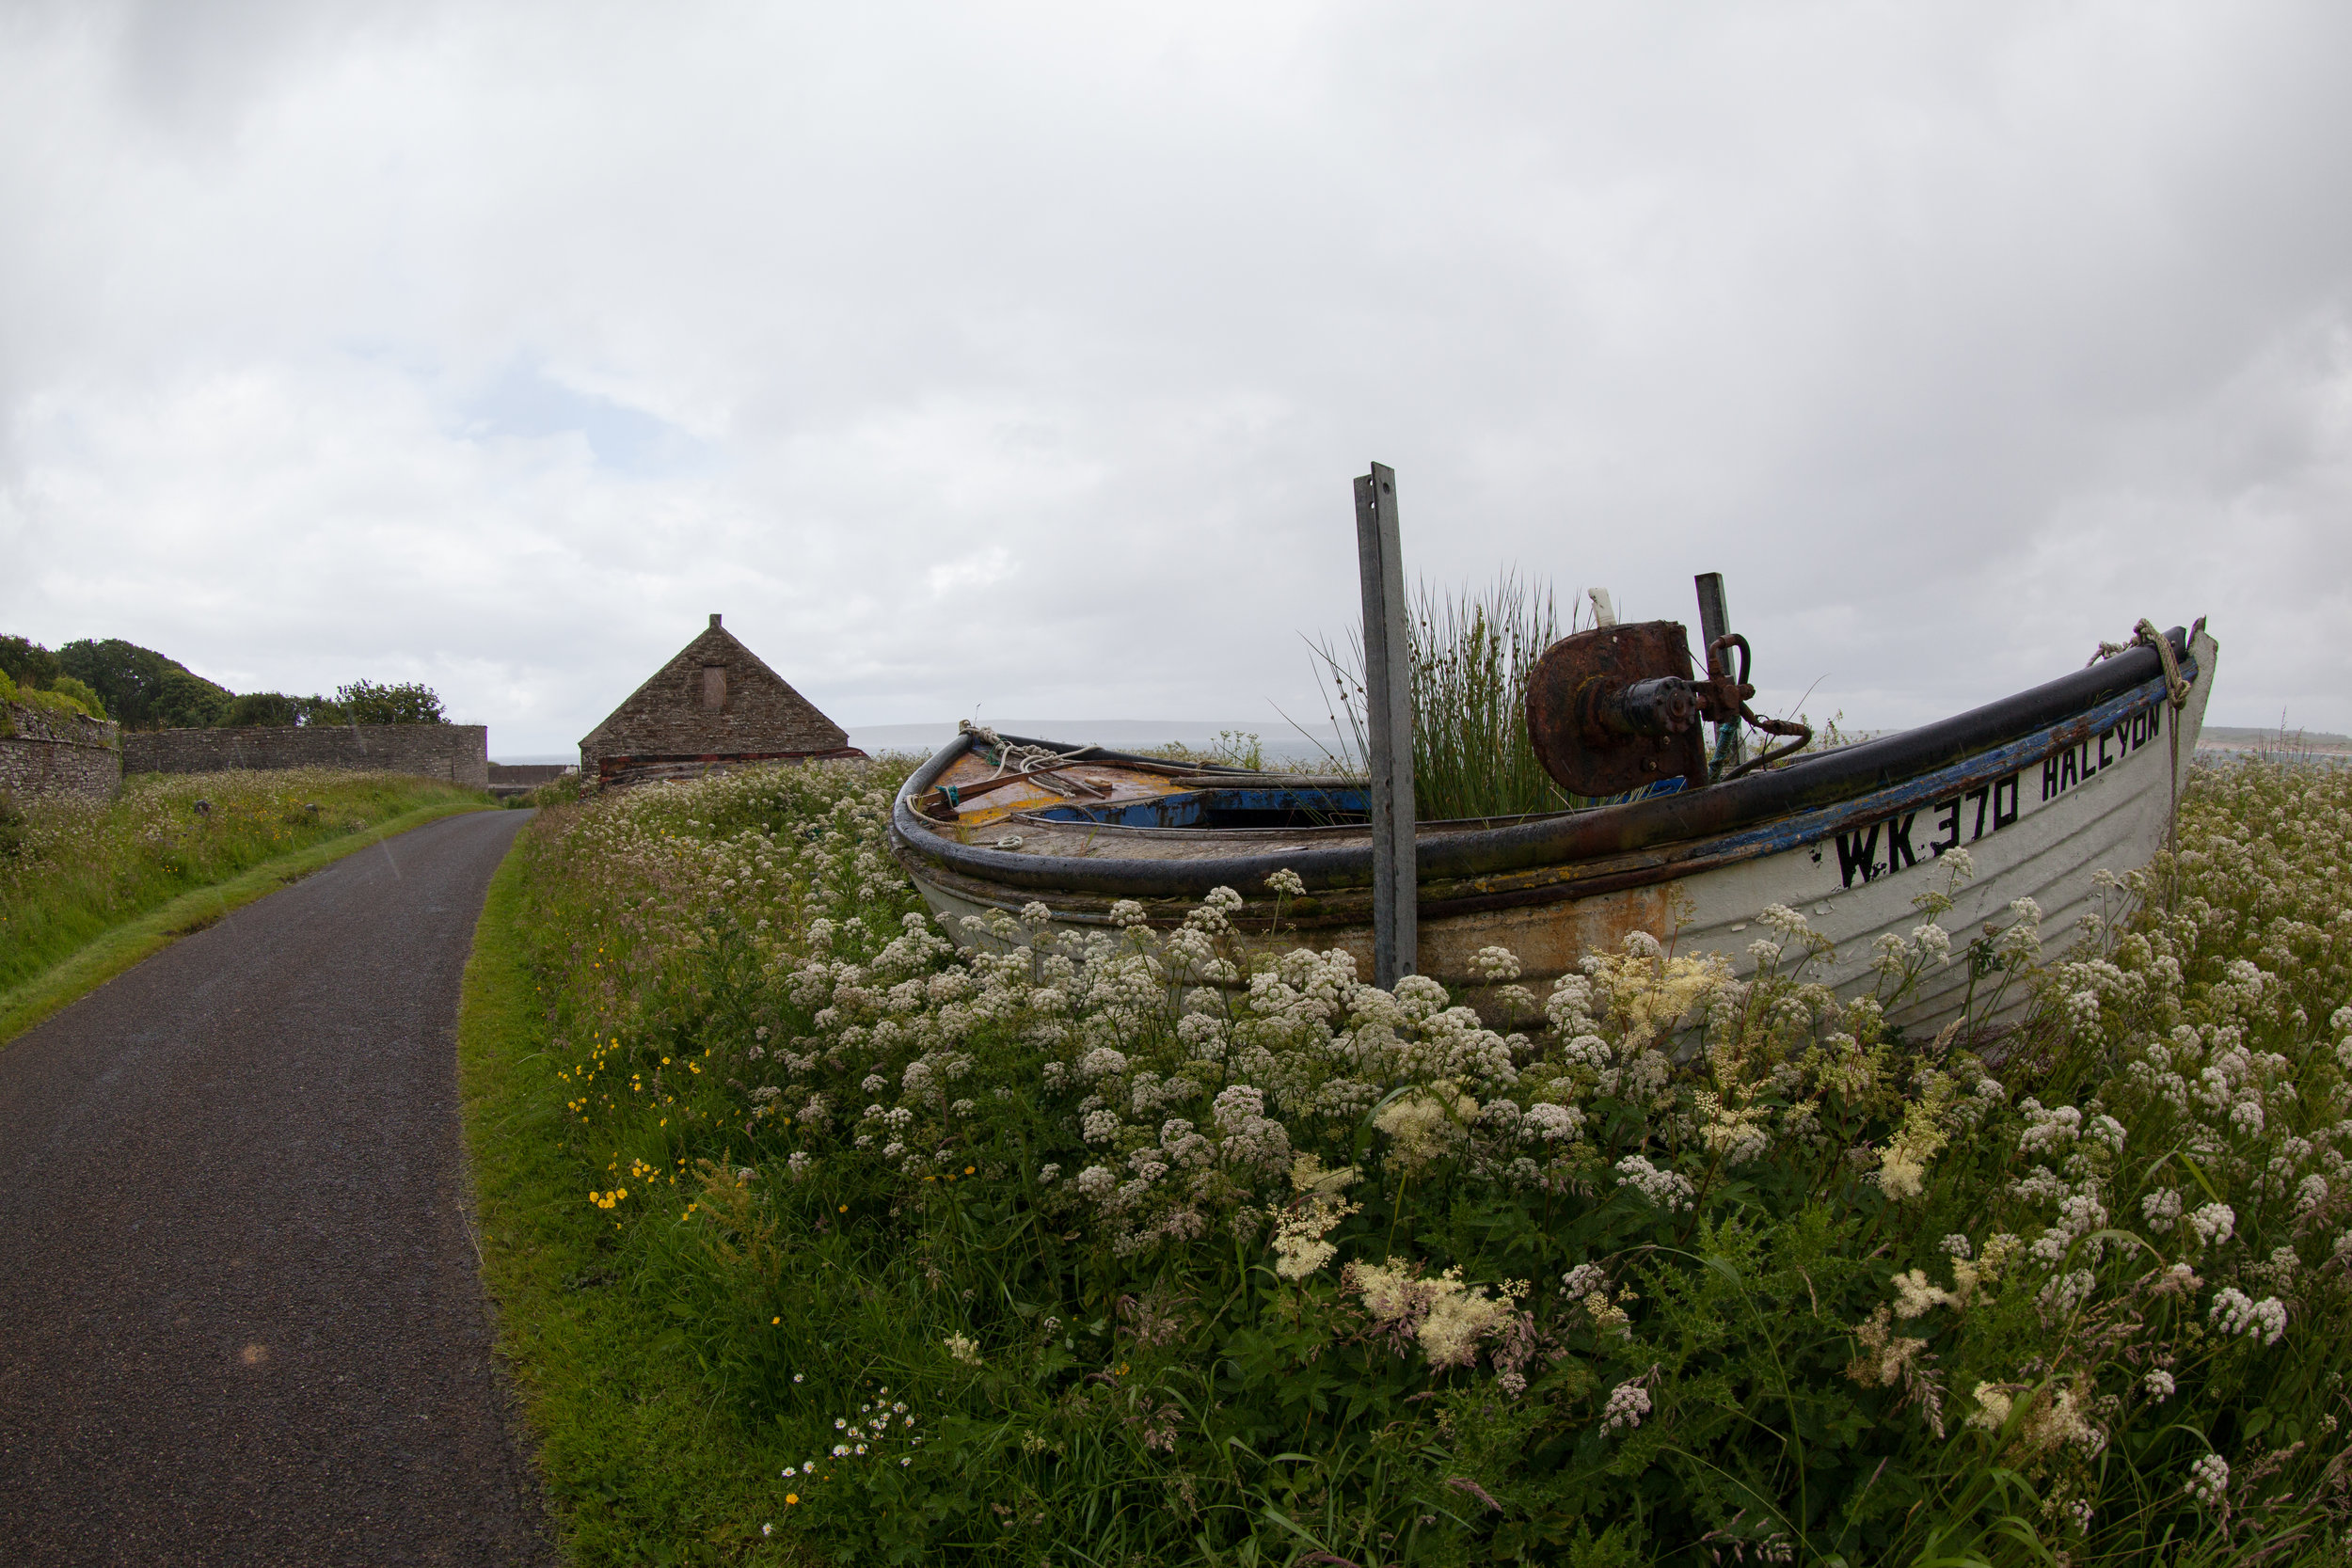 A boat lies in a meadow on the side of the road.